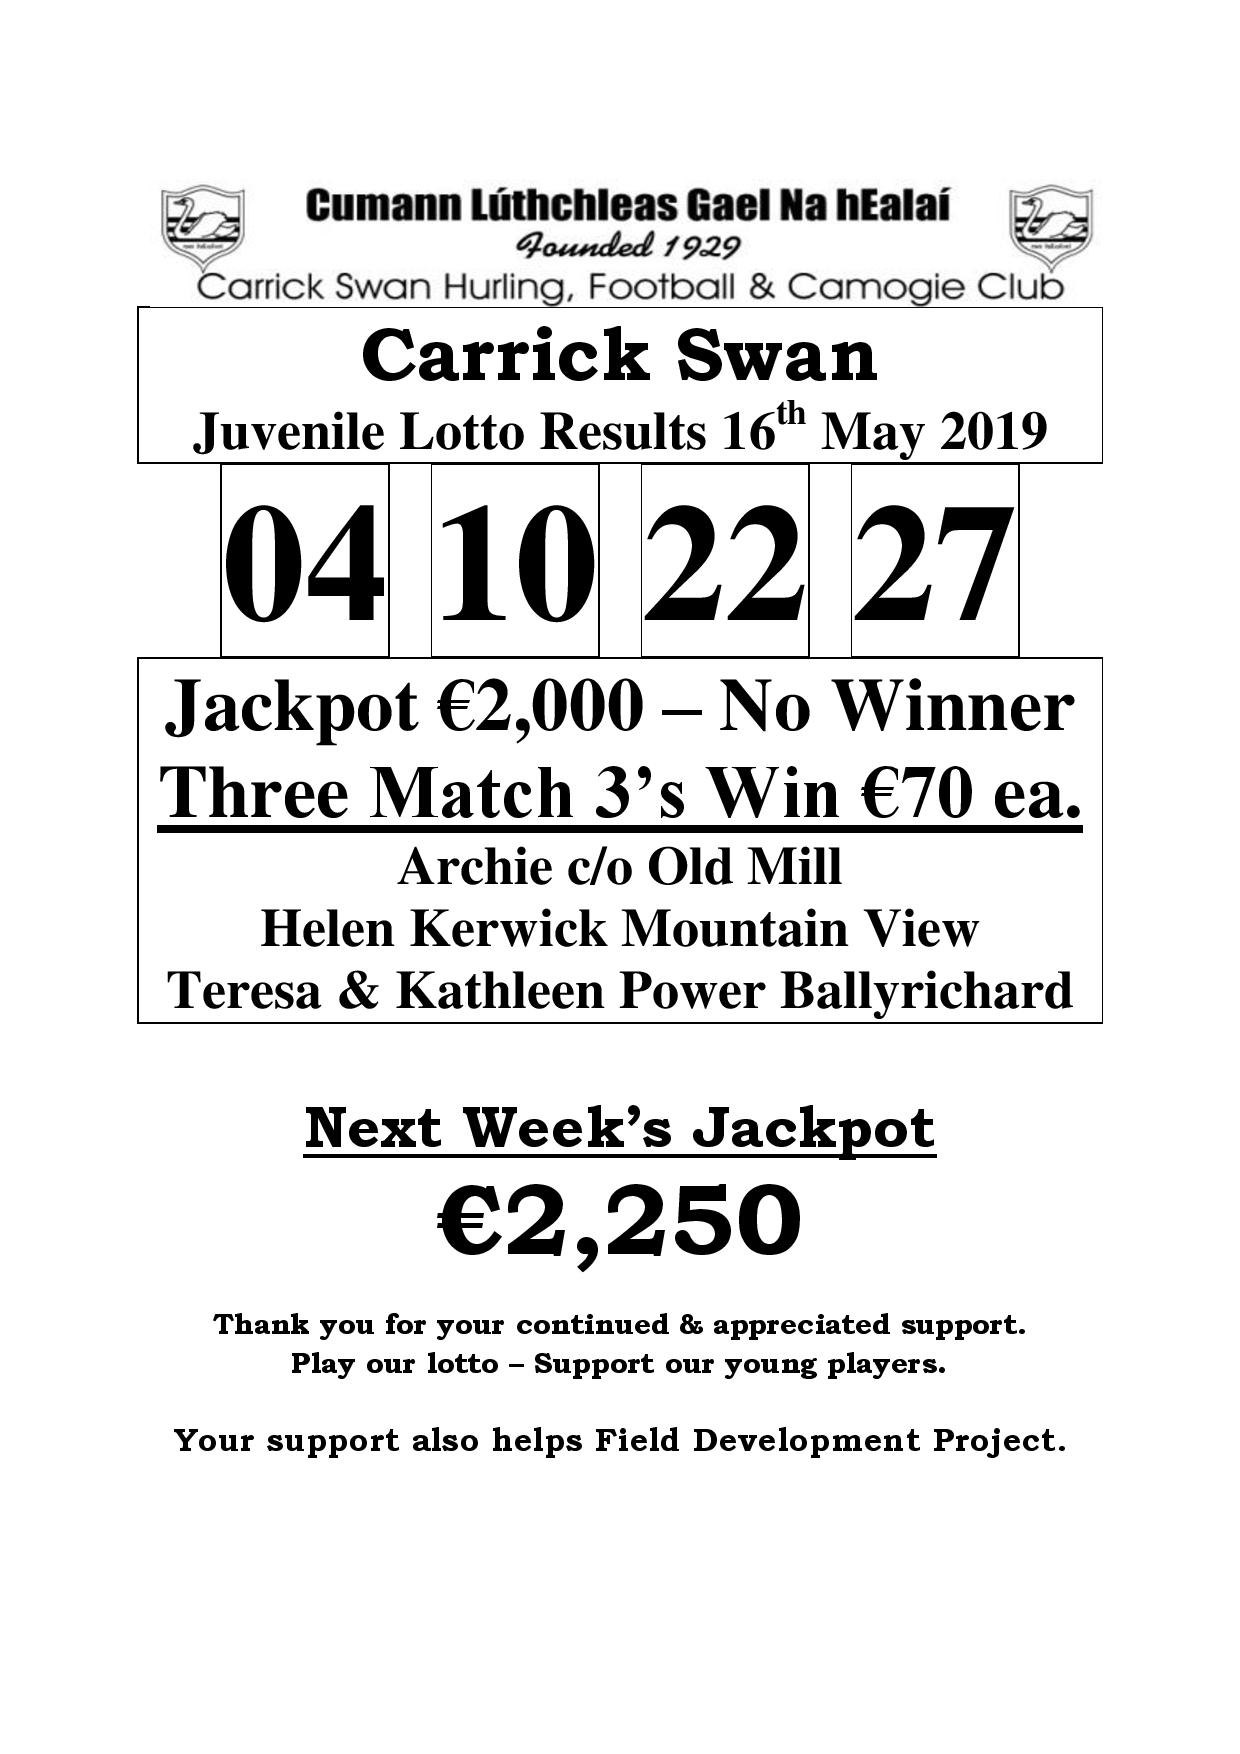 lotto results for 04 may 2019